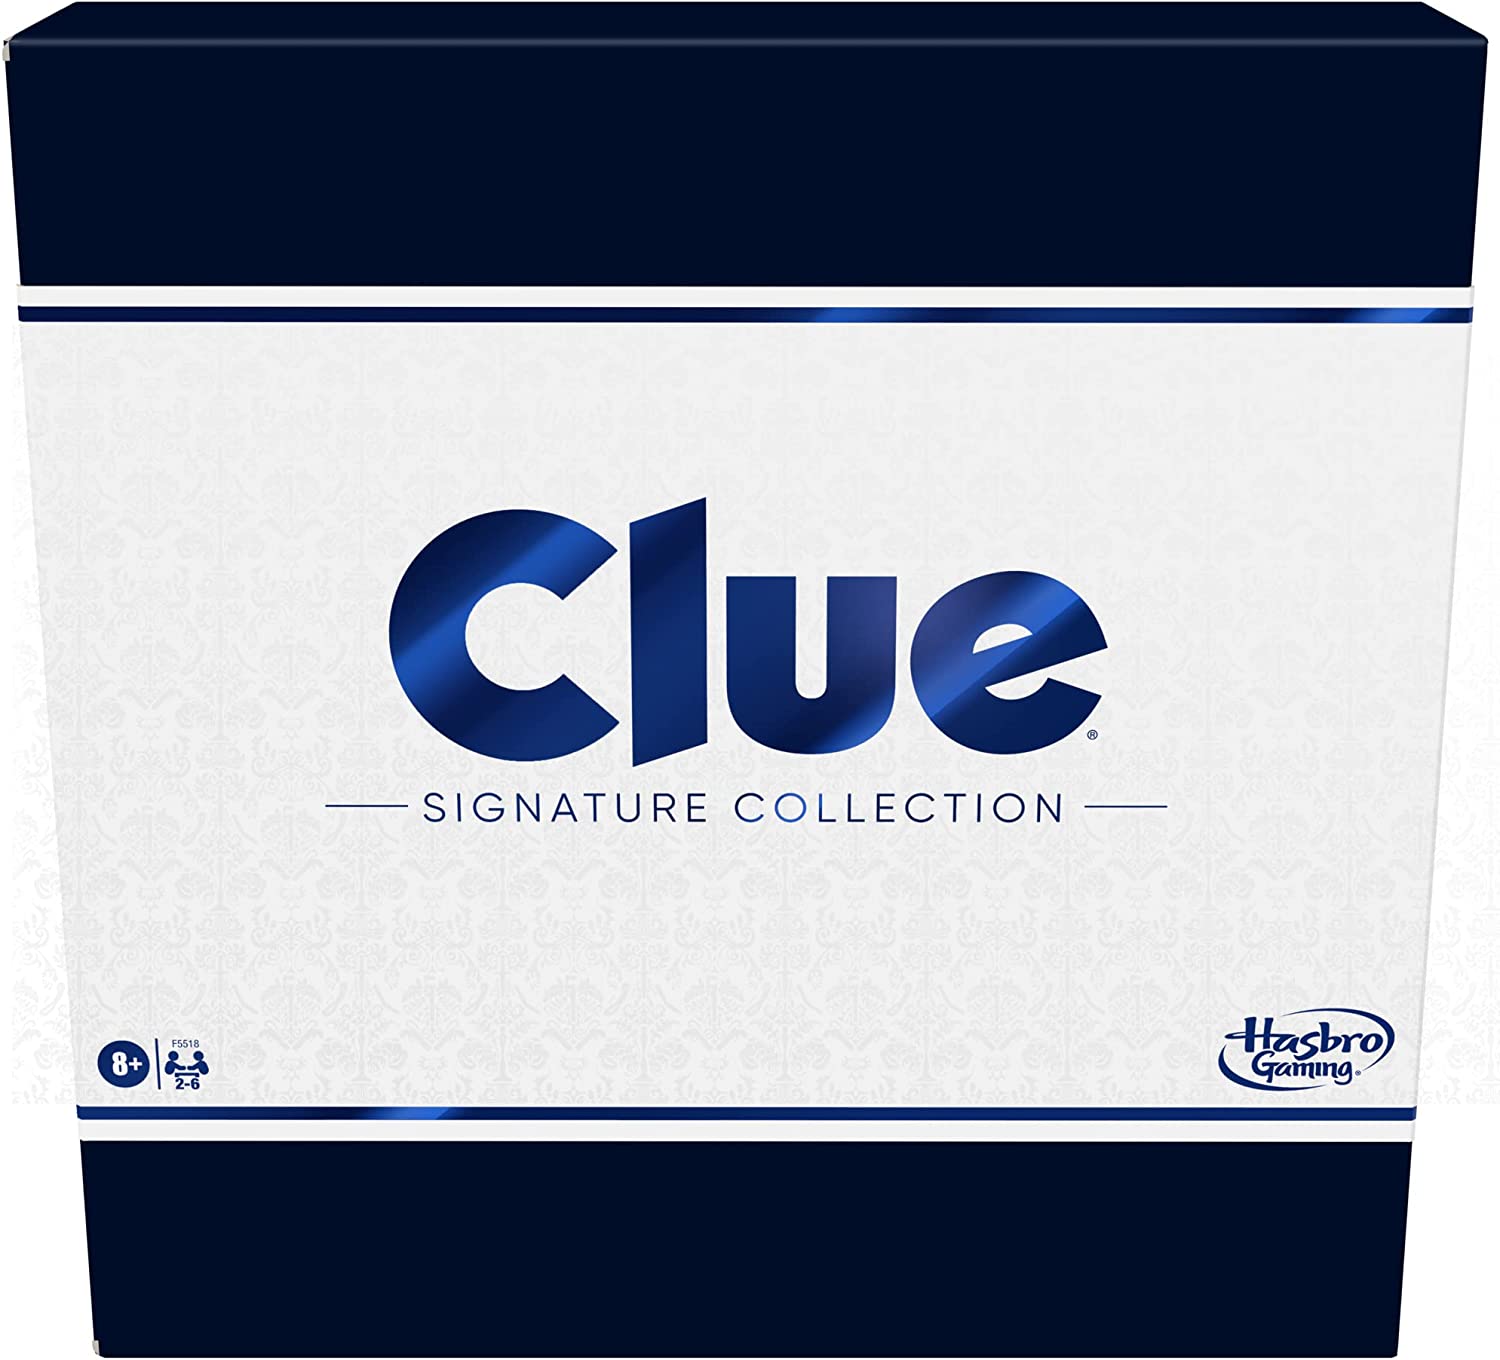 Clue Signature Collection Board Game w/ Premium Packaging and Components $11.49 + Free S&H w/ Prime or $35+